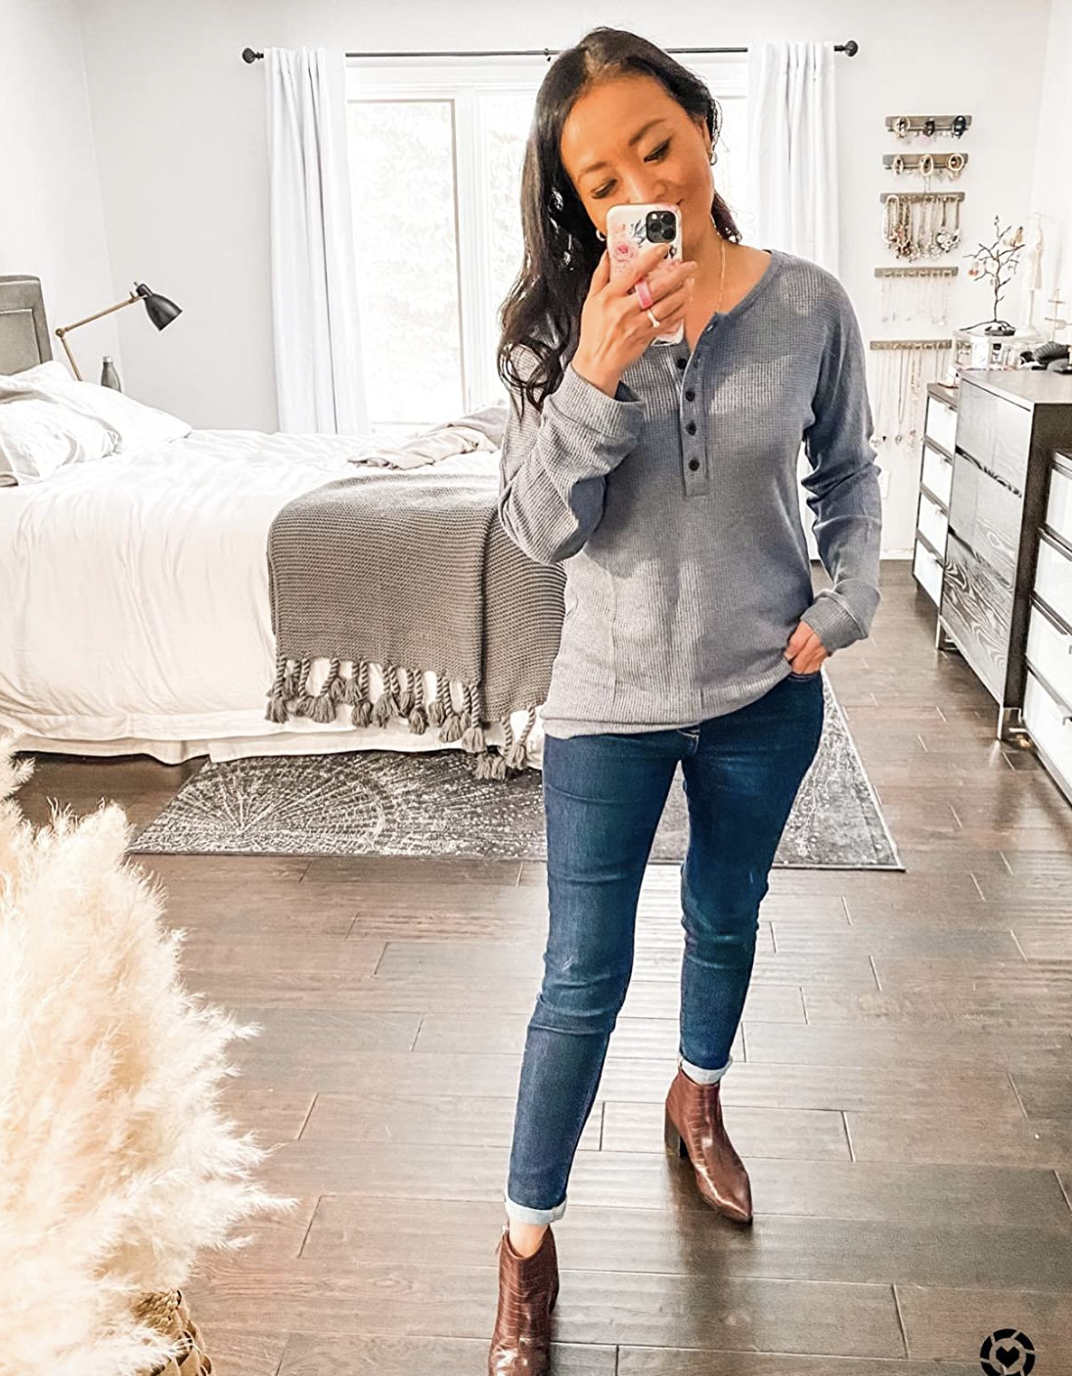 reviewer in a casual buttoned top and jeans, taking a selfie in a mirror in a well-lit bedroom